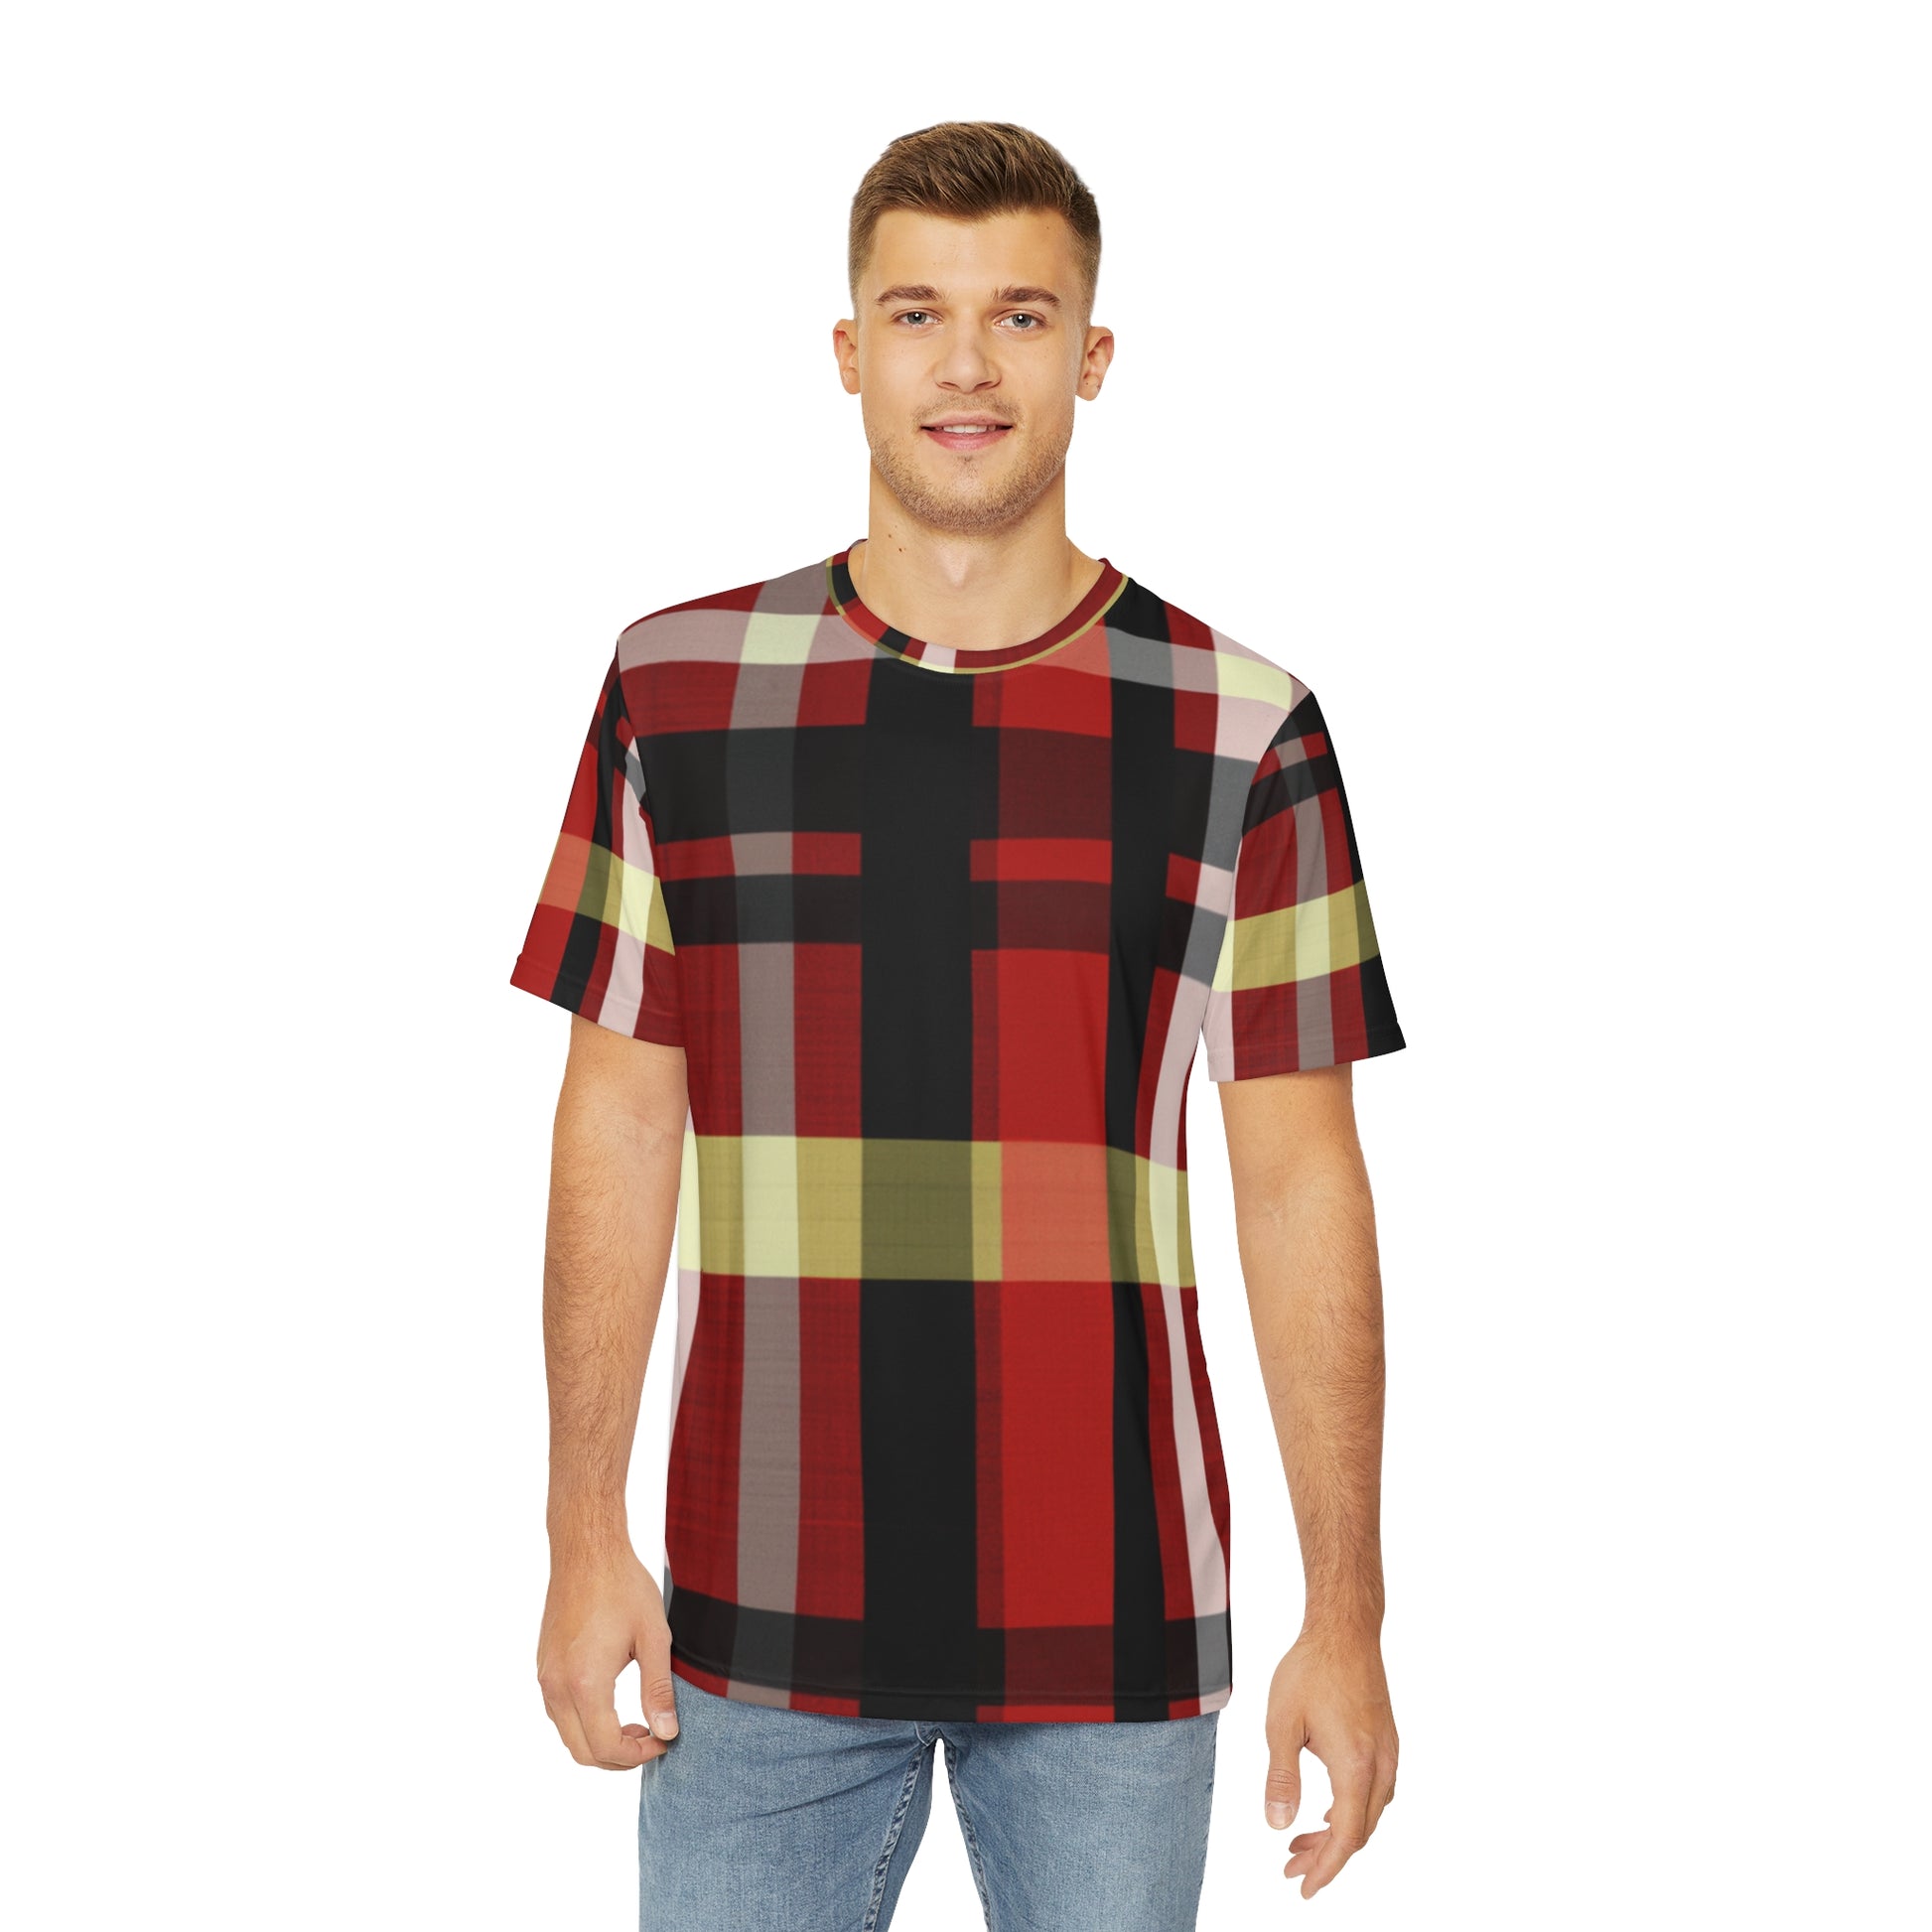 Front view of the Highlander's Dawn Tartan Crewneck Pullover Short-Sleeved Shirt red black white yellow plaid pattern paired with casual denim pants worn by a white man